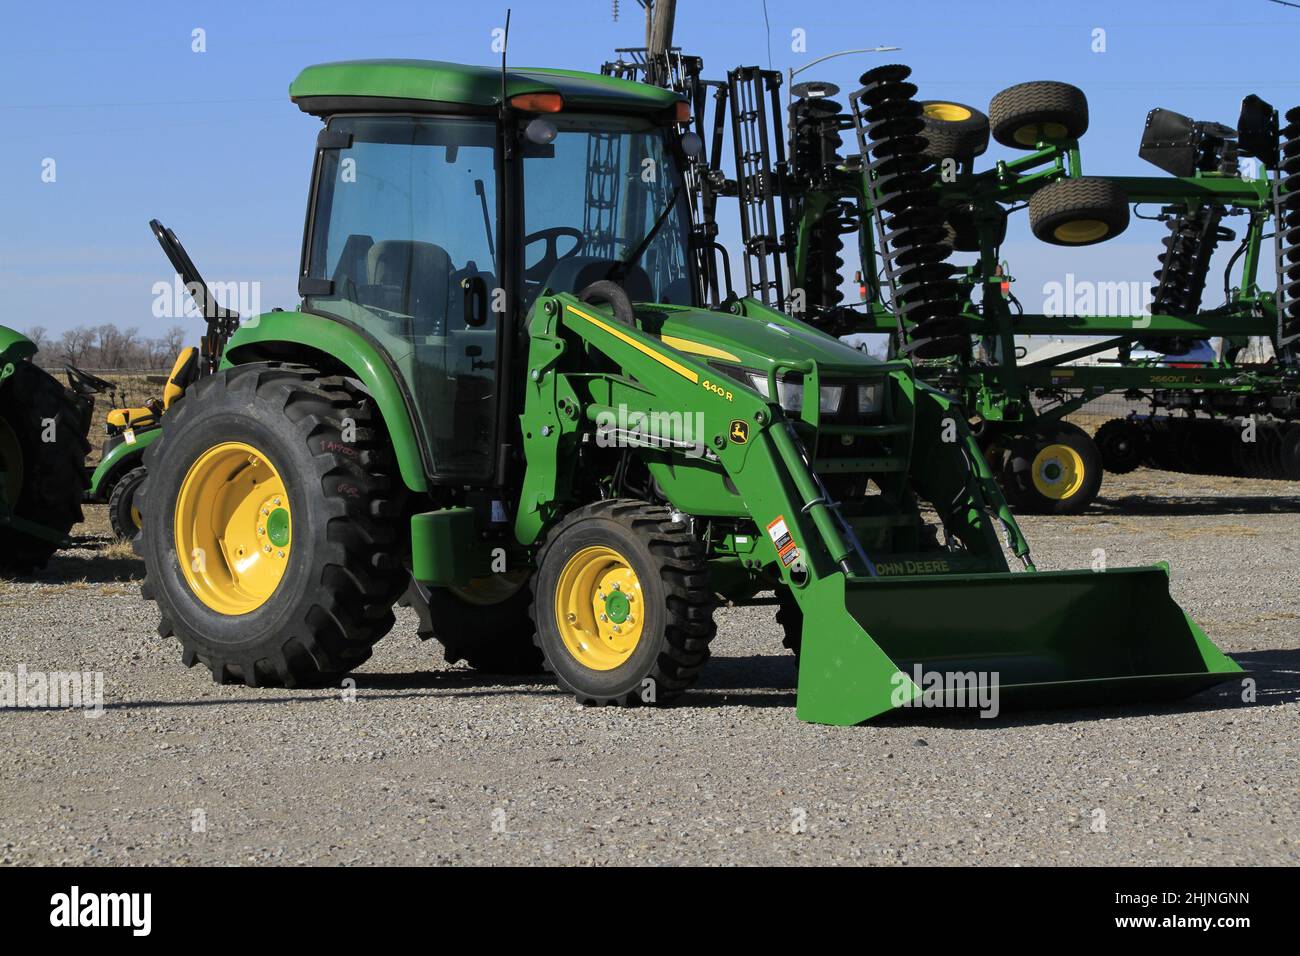 A John Deere farm tractor  in a Dealership with blue sky in the background in Kansas Stock Photo